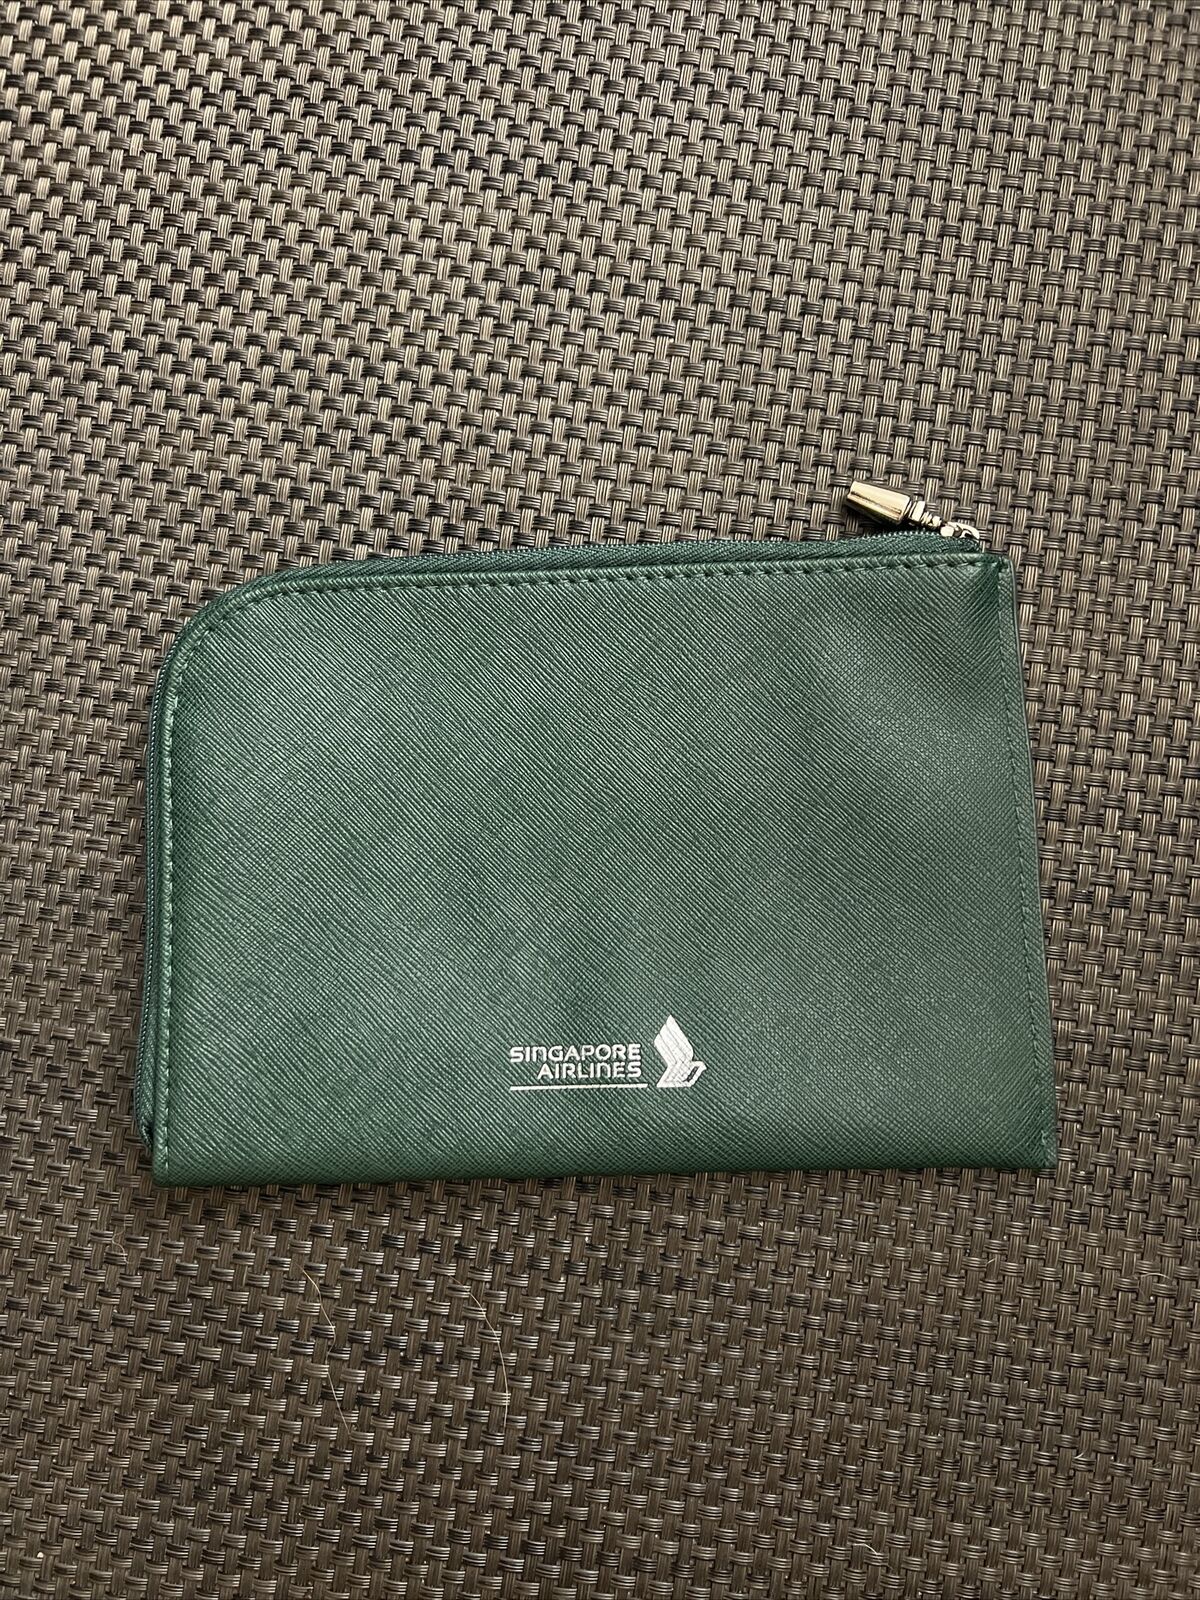 Singapore Airlines Amenity Bag No Contents